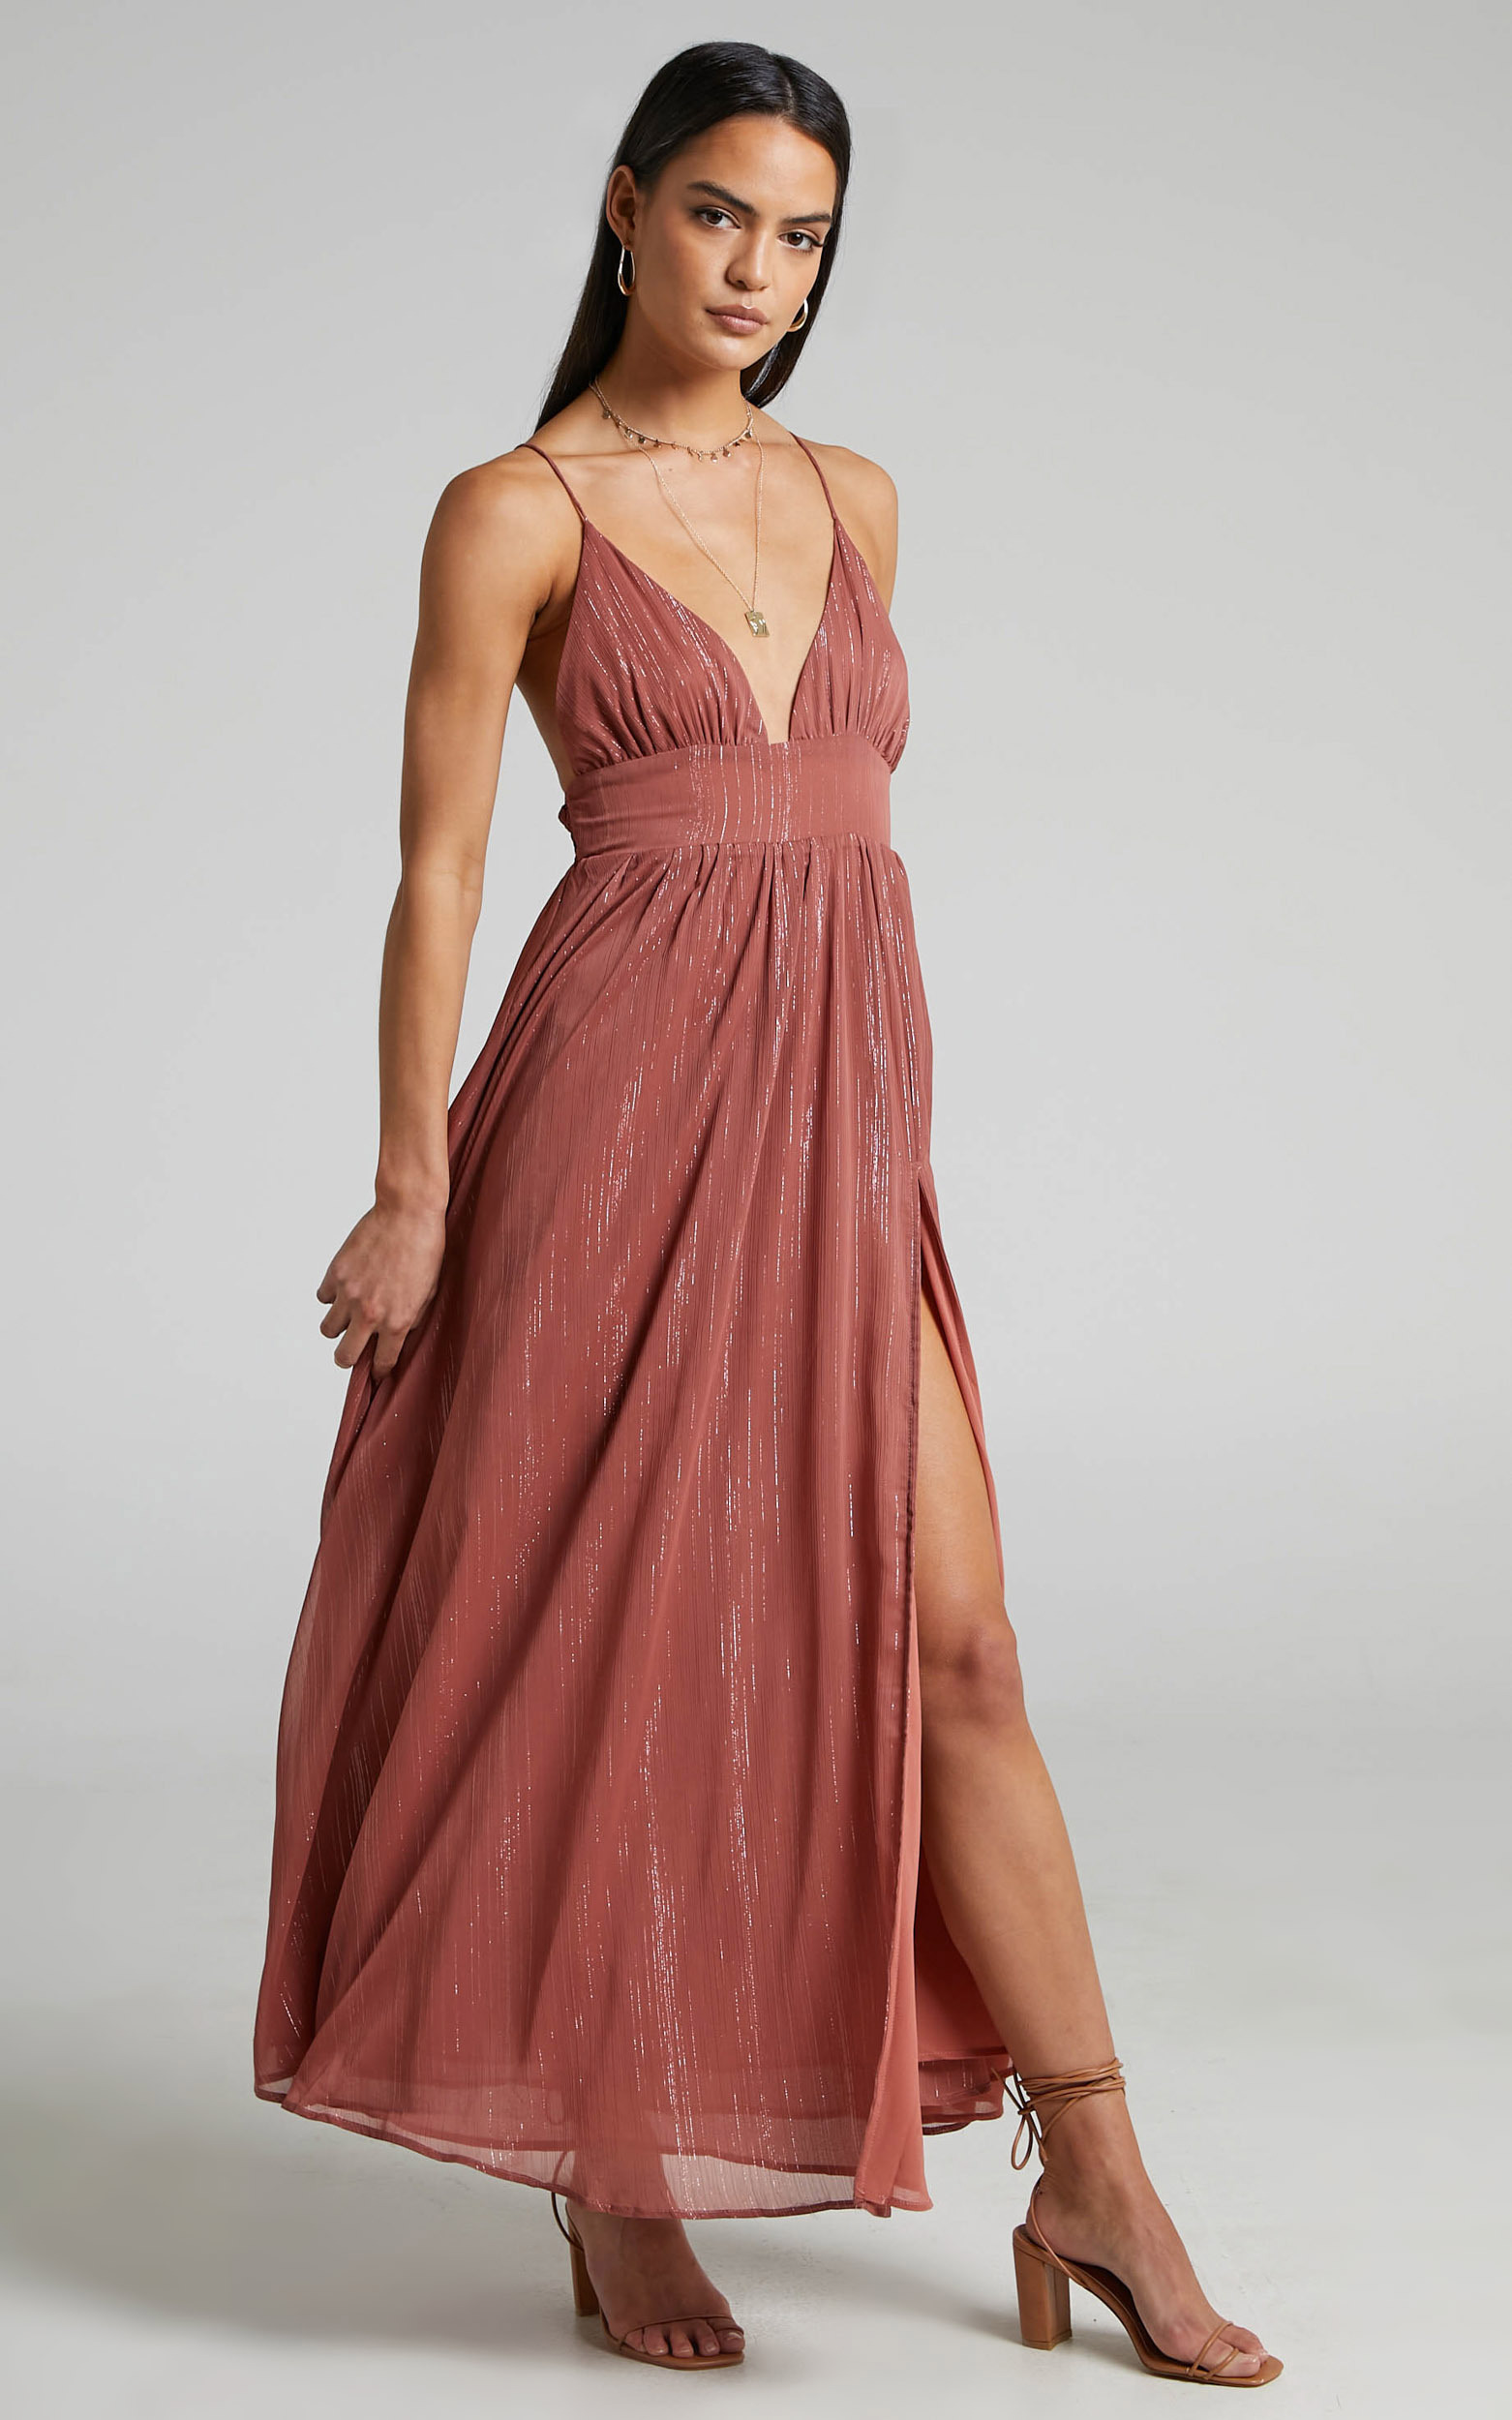 Indiana Gathered Plunge Maxi Dress in Dusty Rose - 06, PNK1, hi-res image number null